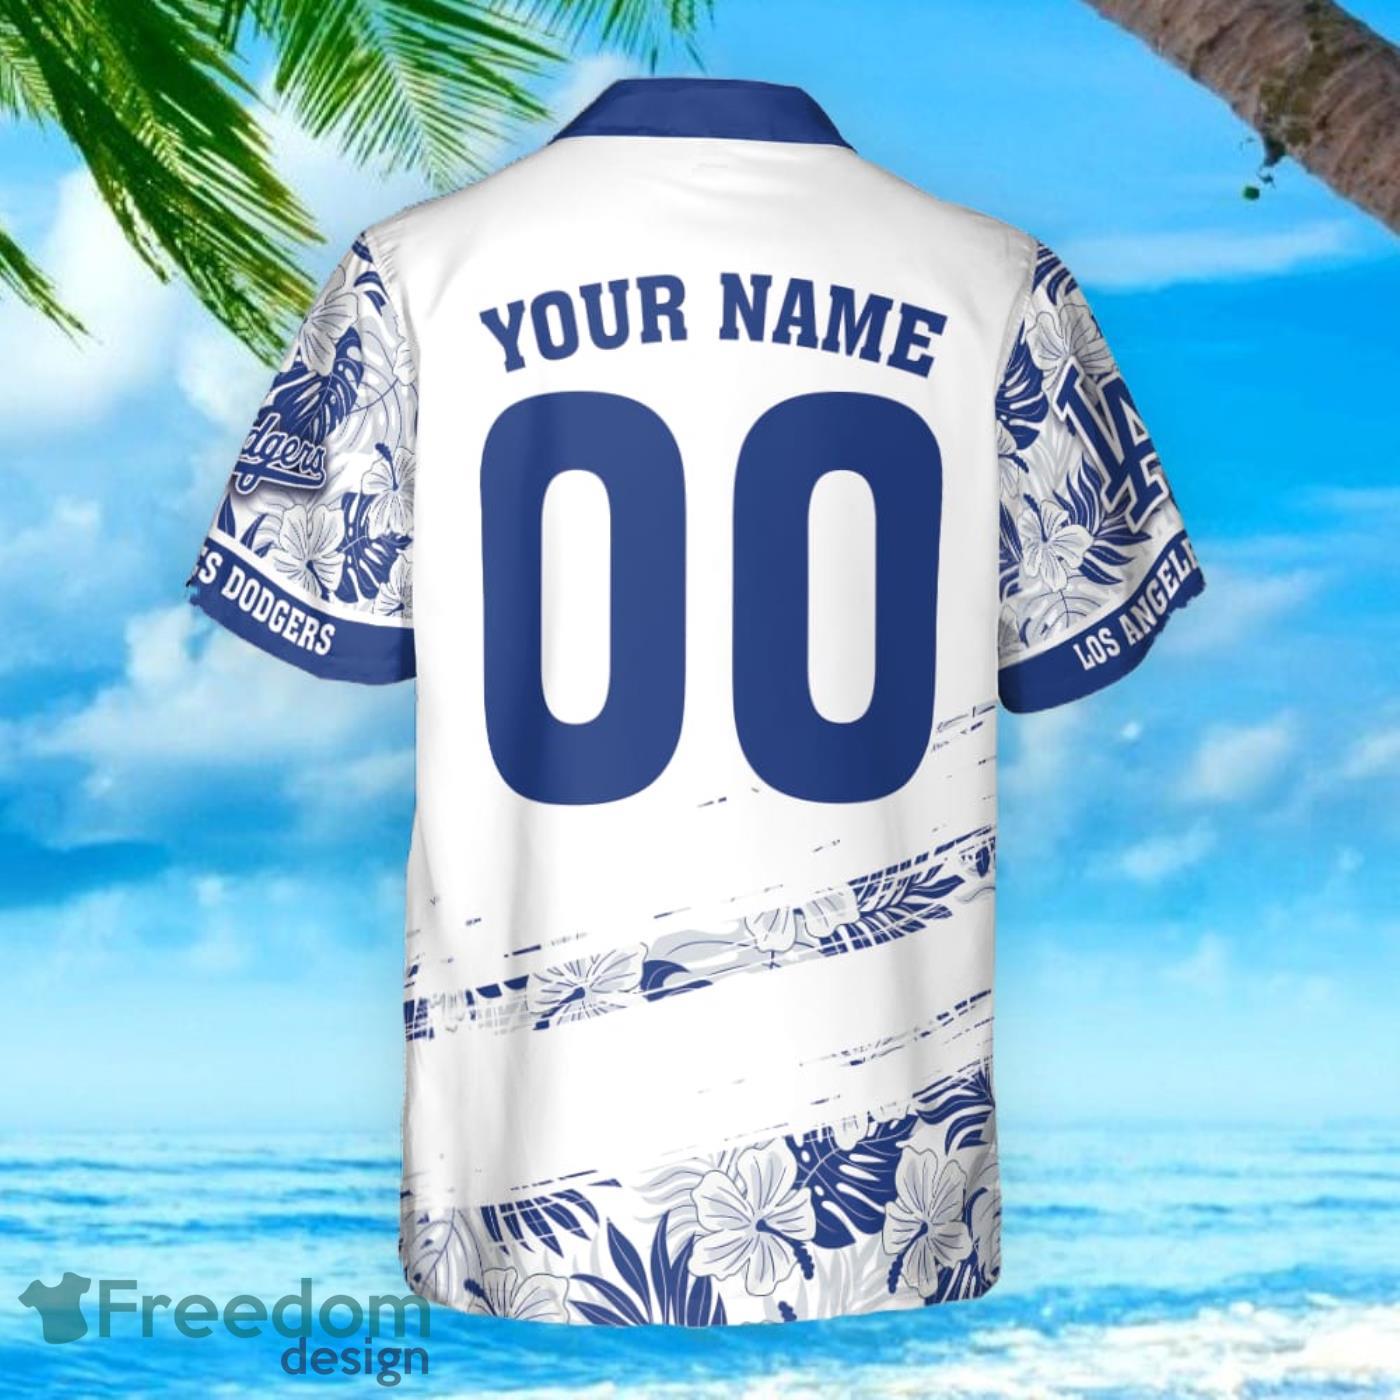 Los Angeles Dodgers Design MLB Jersey Shirt Custom Number And Name